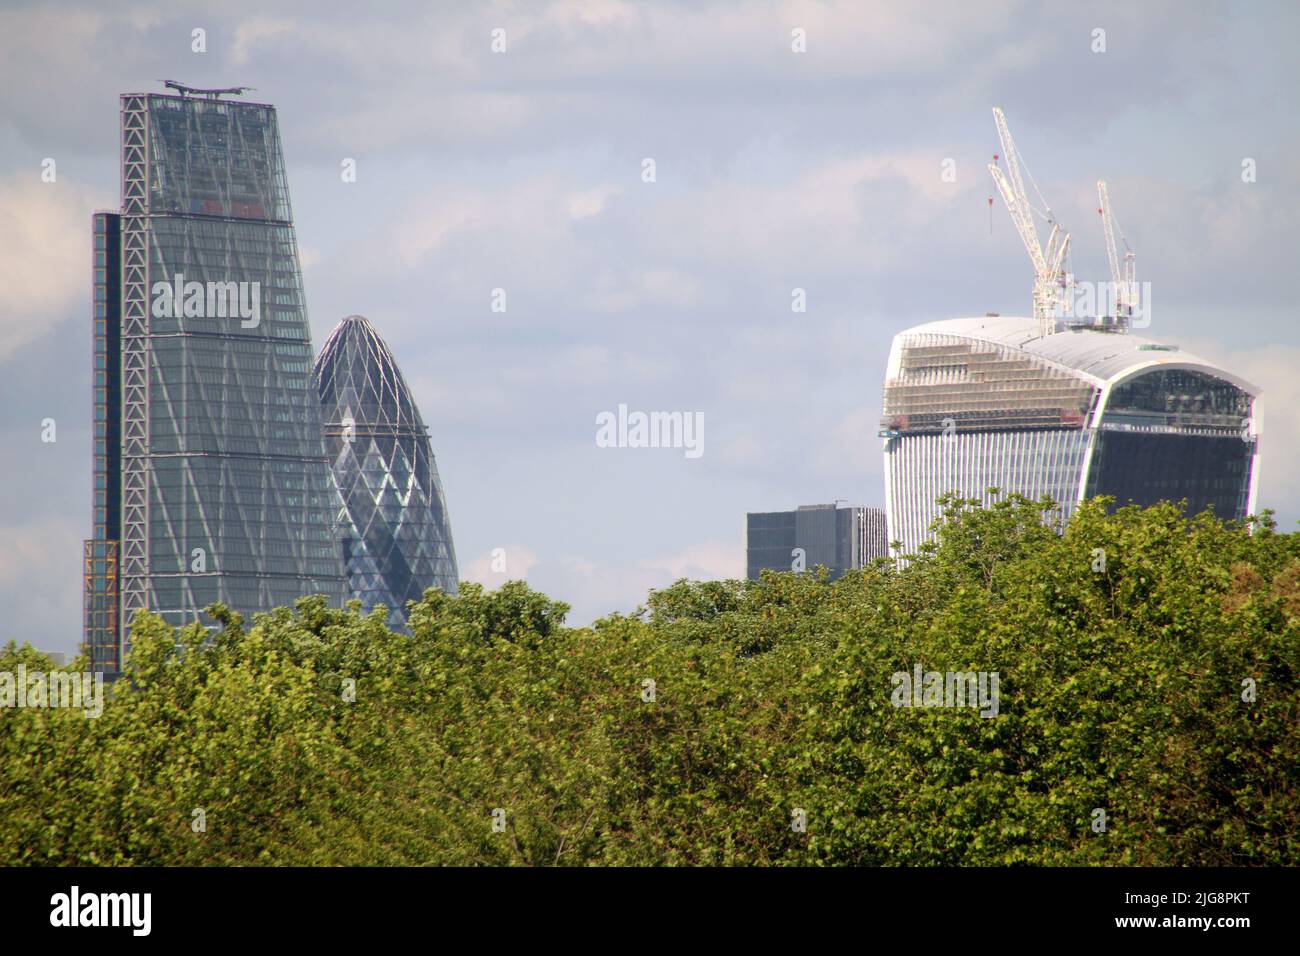 The modern buildings behind the trees in London Stock Photo